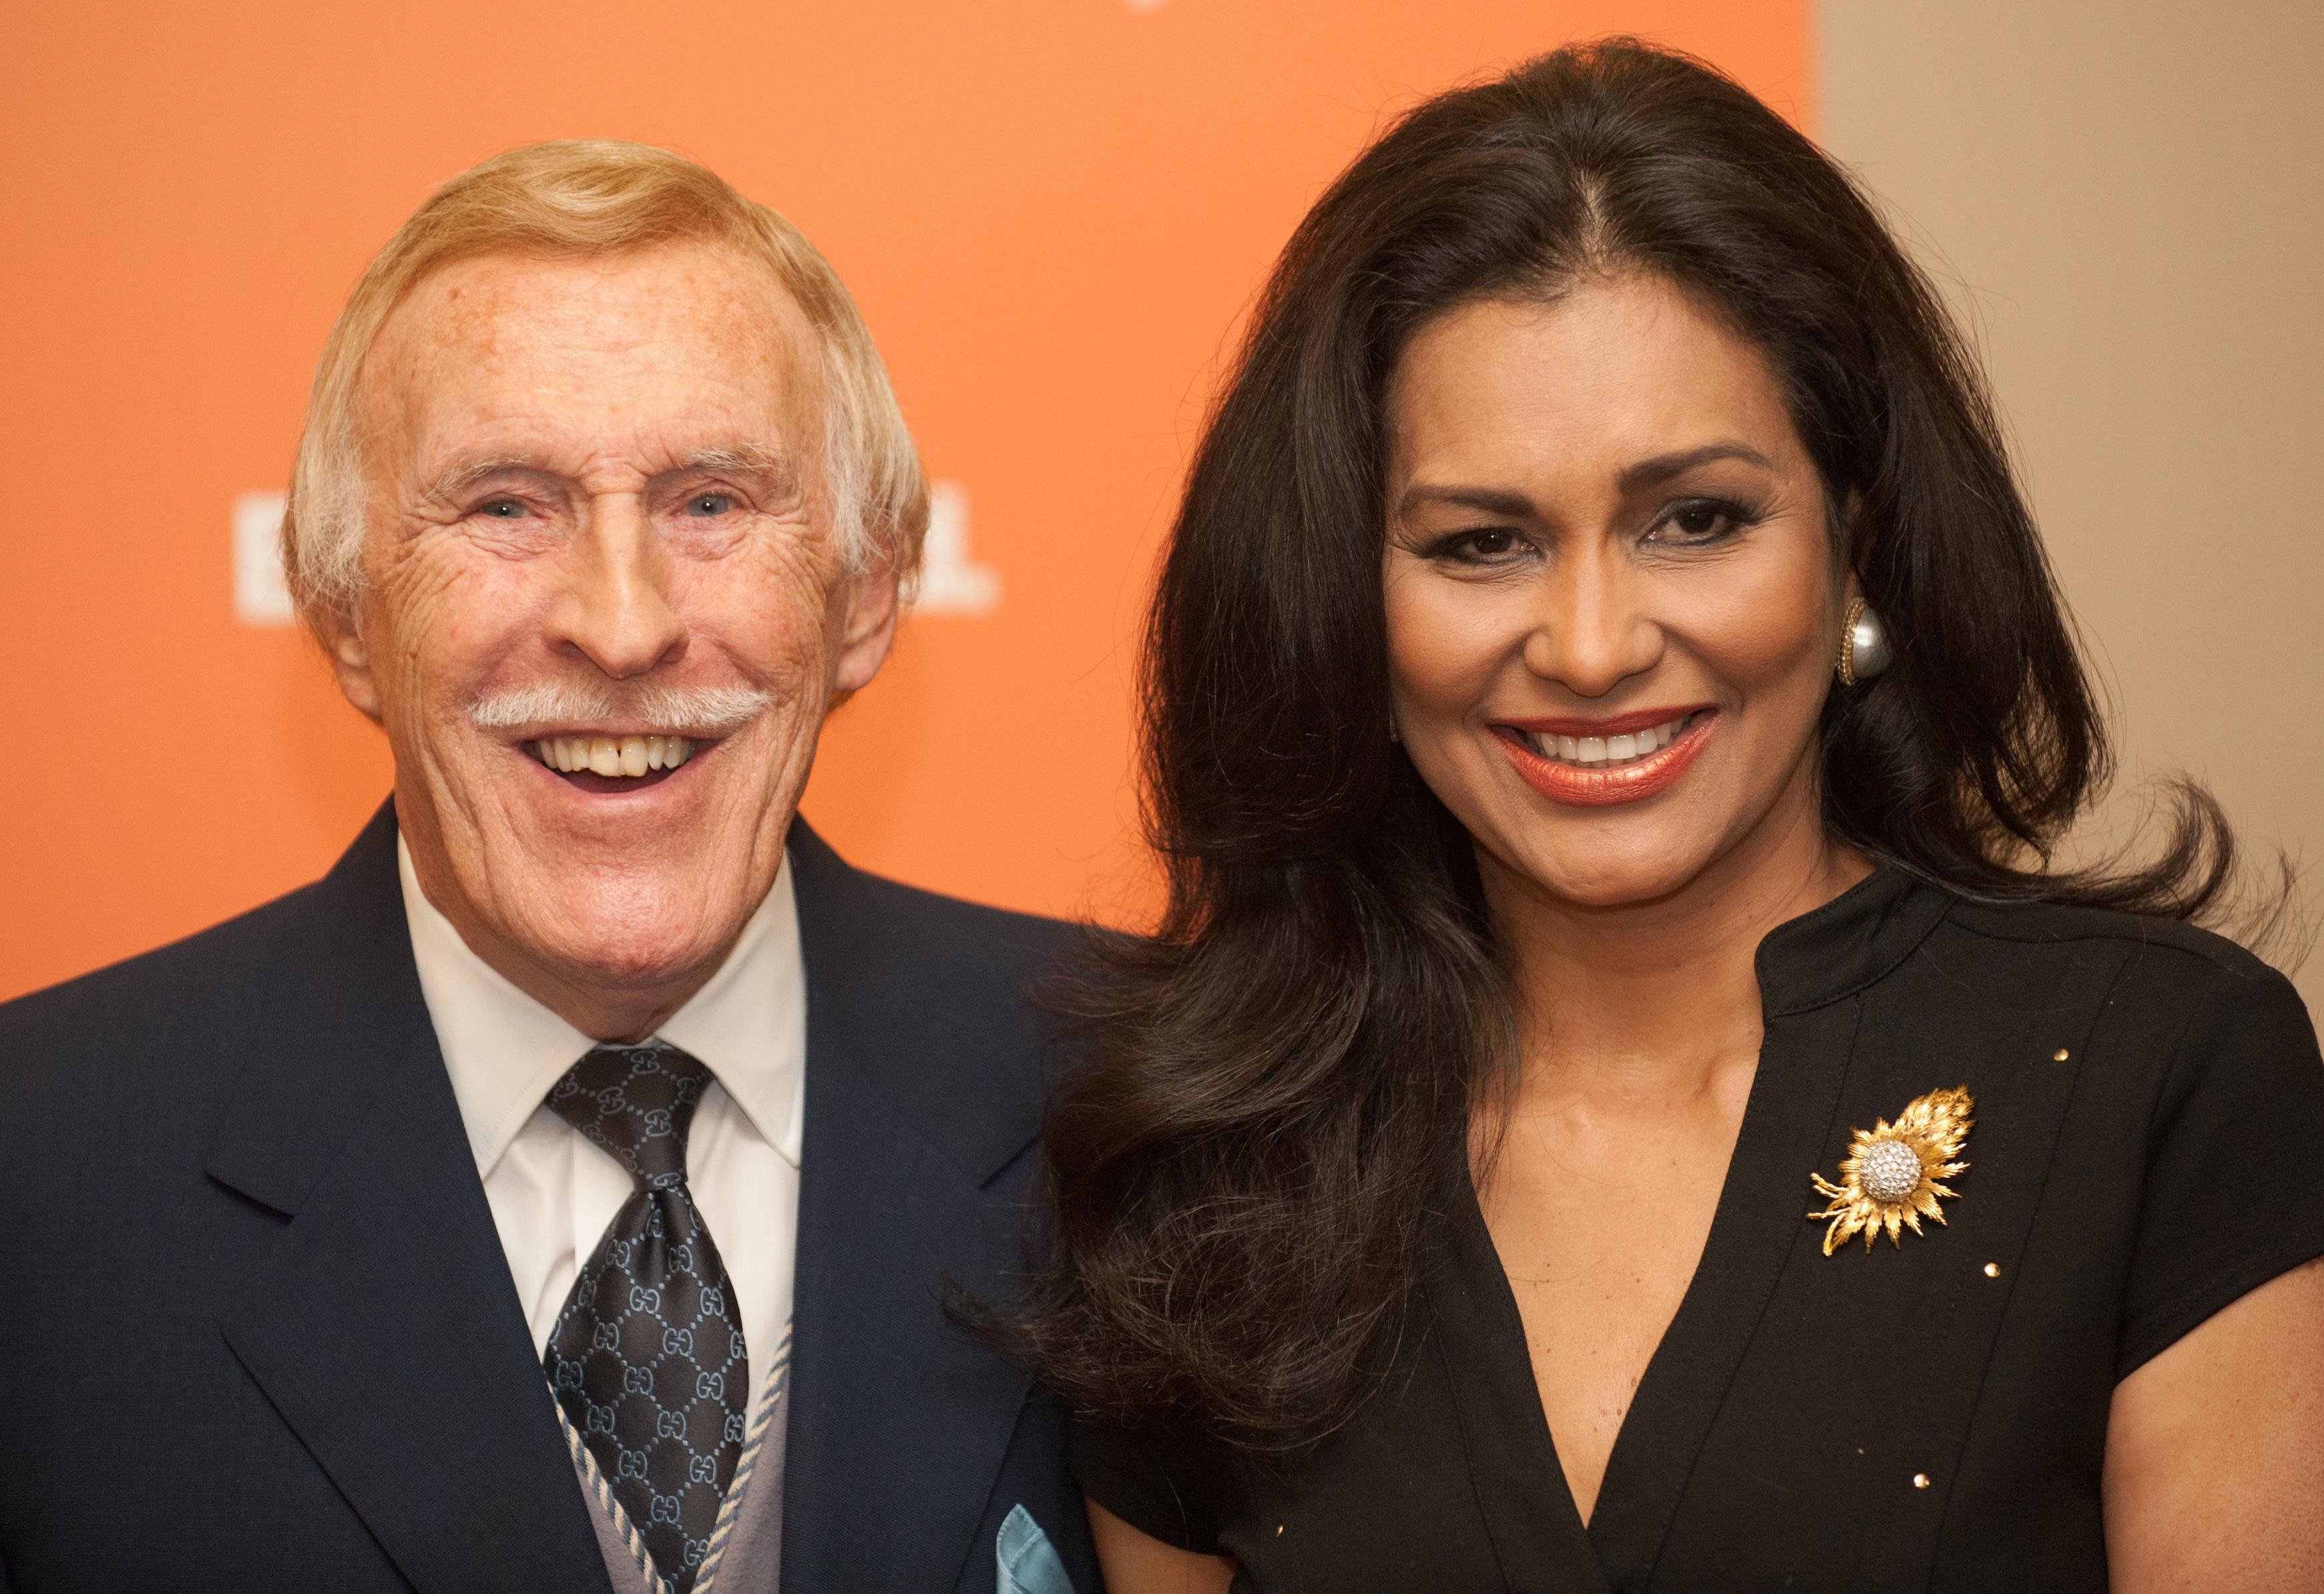 Sir Bruce Forsyth and his wife Wilnelia